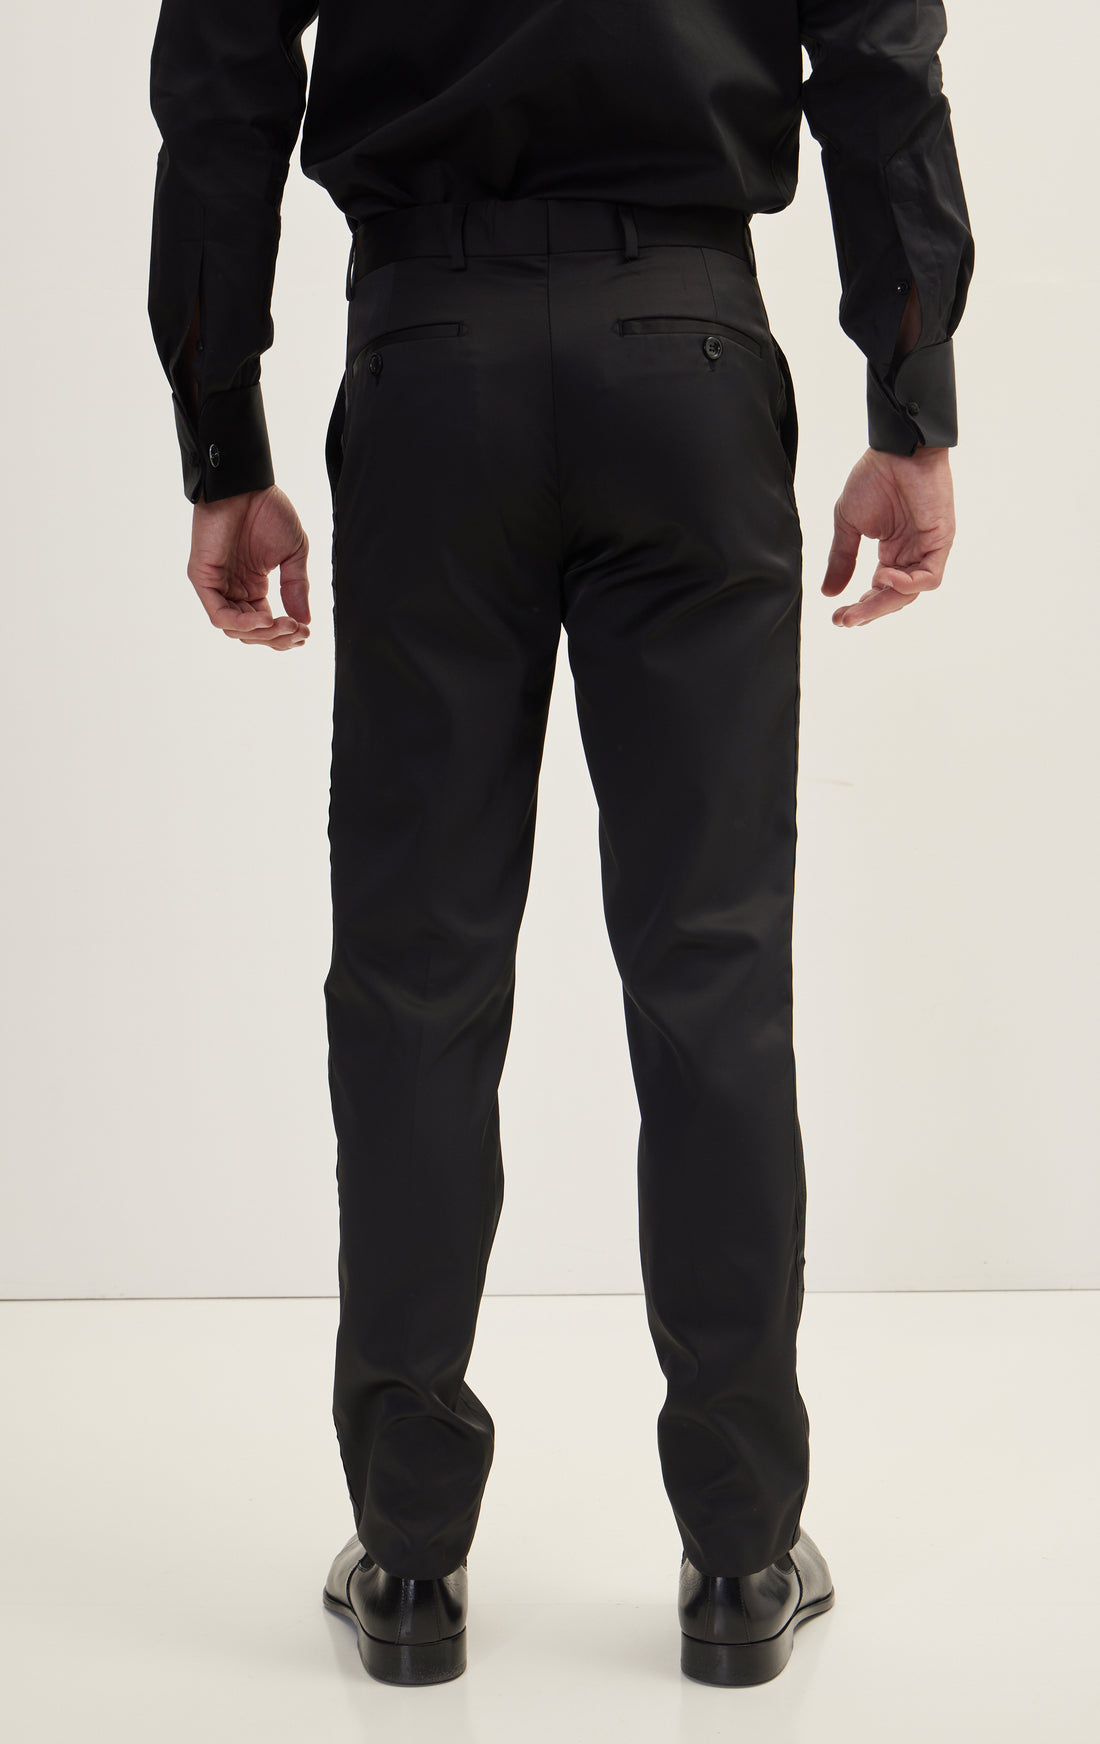 Striped Fitted Tuxedo Pants - Black